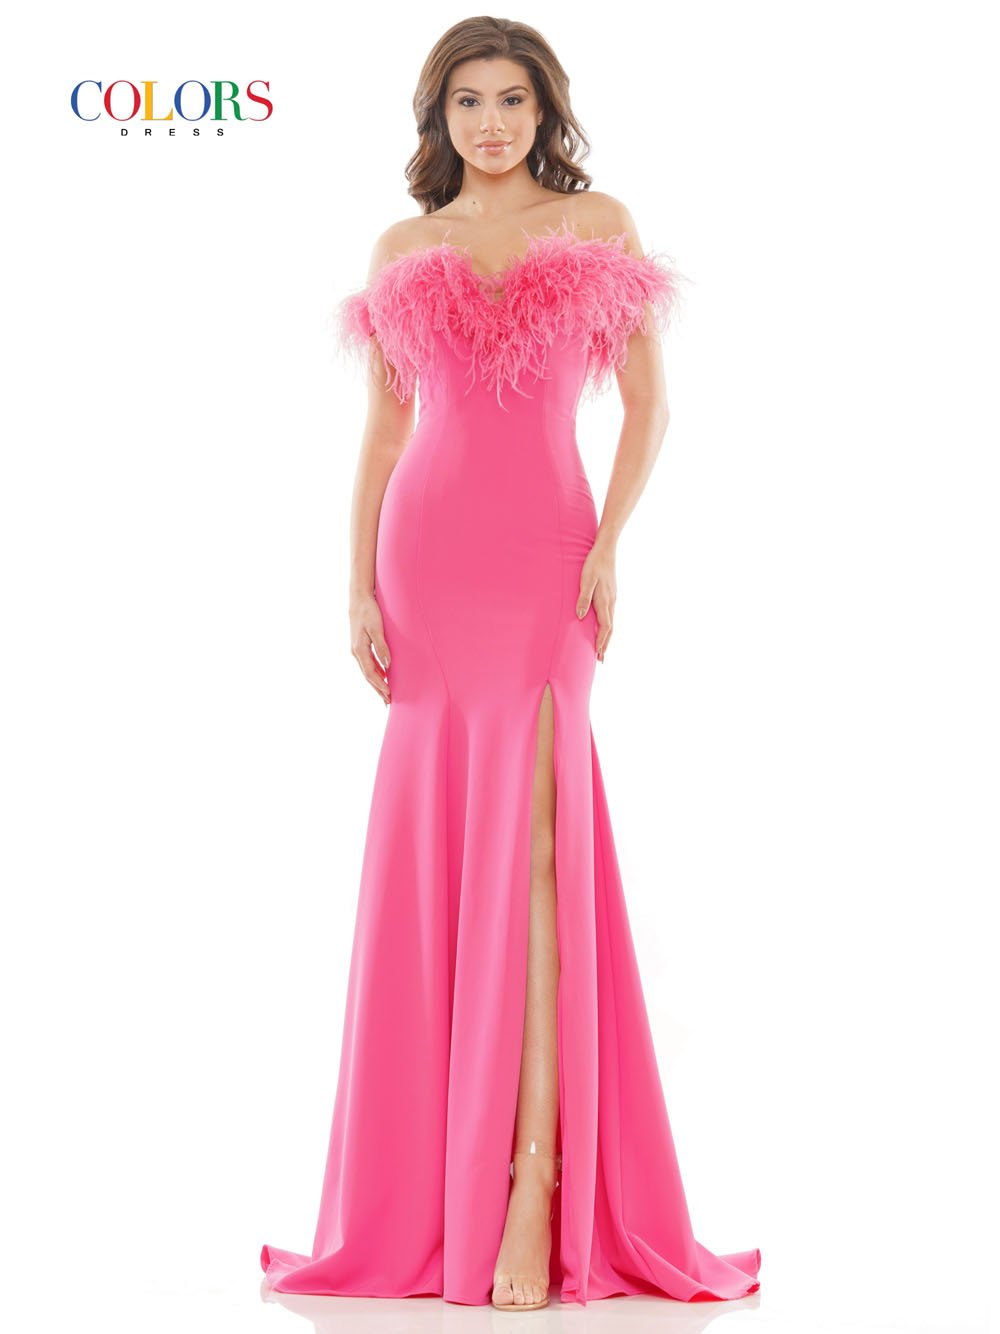 Colors Dress 2663 prom dress images.  Colors Dress 2663 is available in these colors: Hot Pink, Light Blue, Red, Royal,  White.